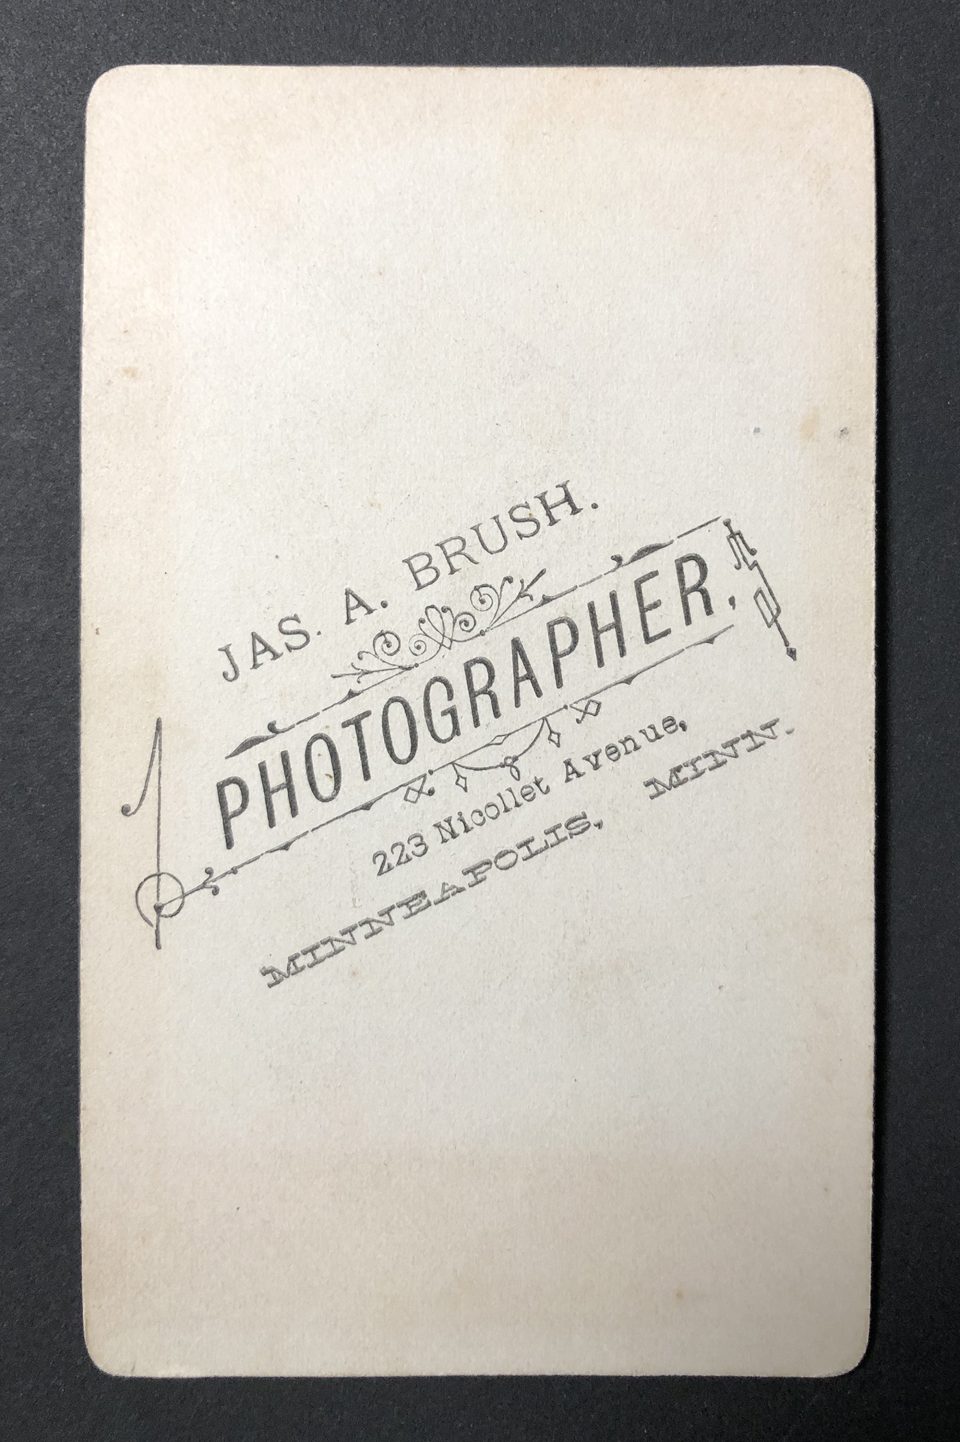 The backside of this portrait gives us another address for photographer J.A. Brush